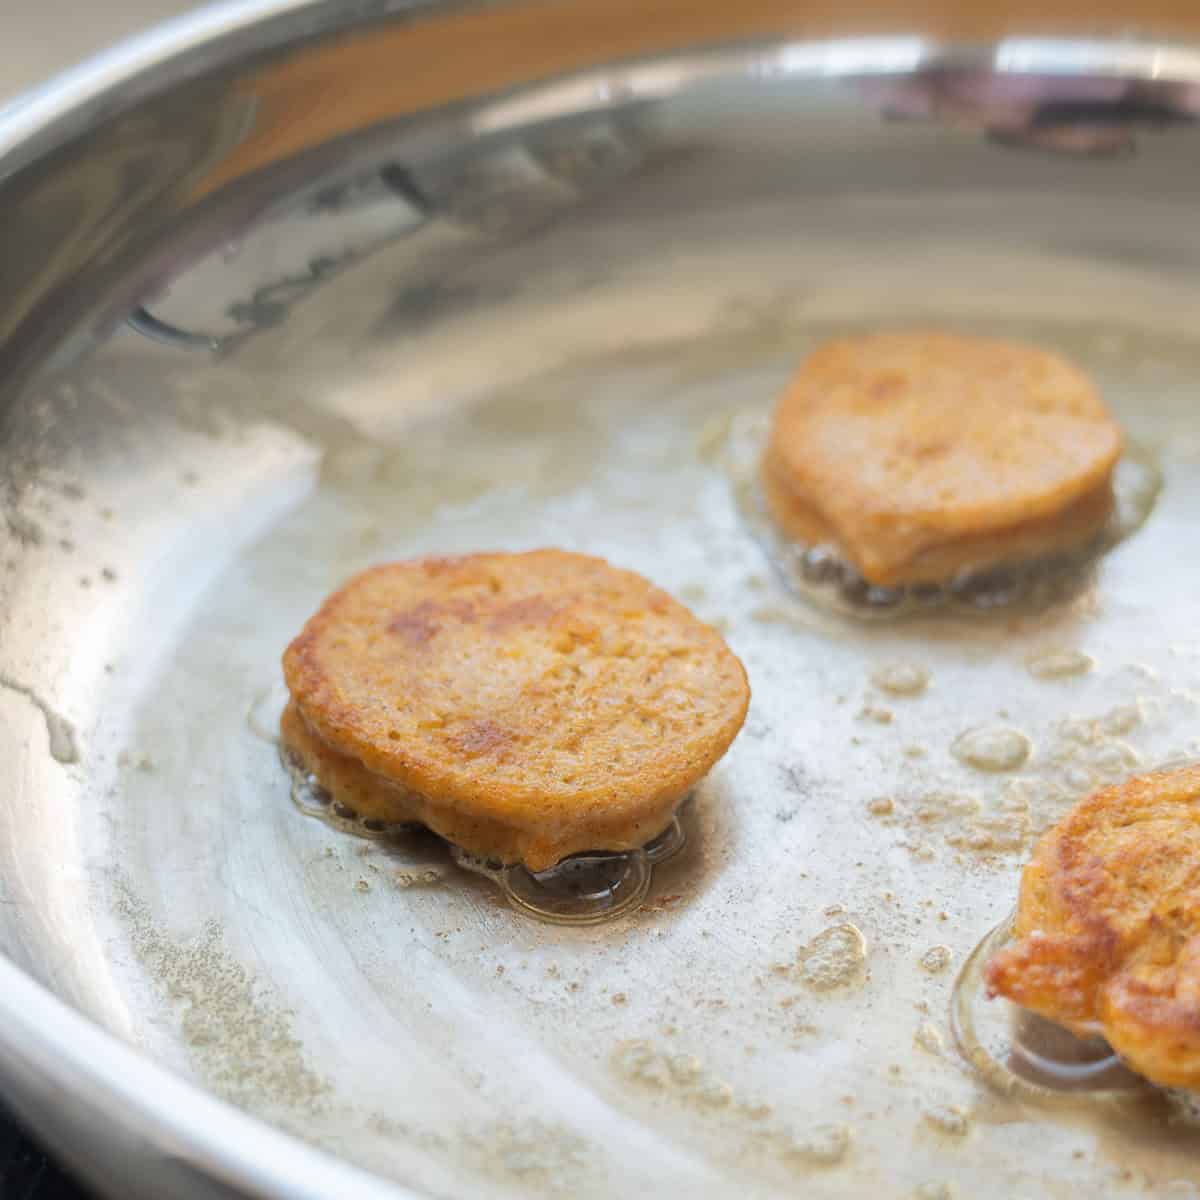 A close up of a golden brown pancakes cooking in butter on a skillet.